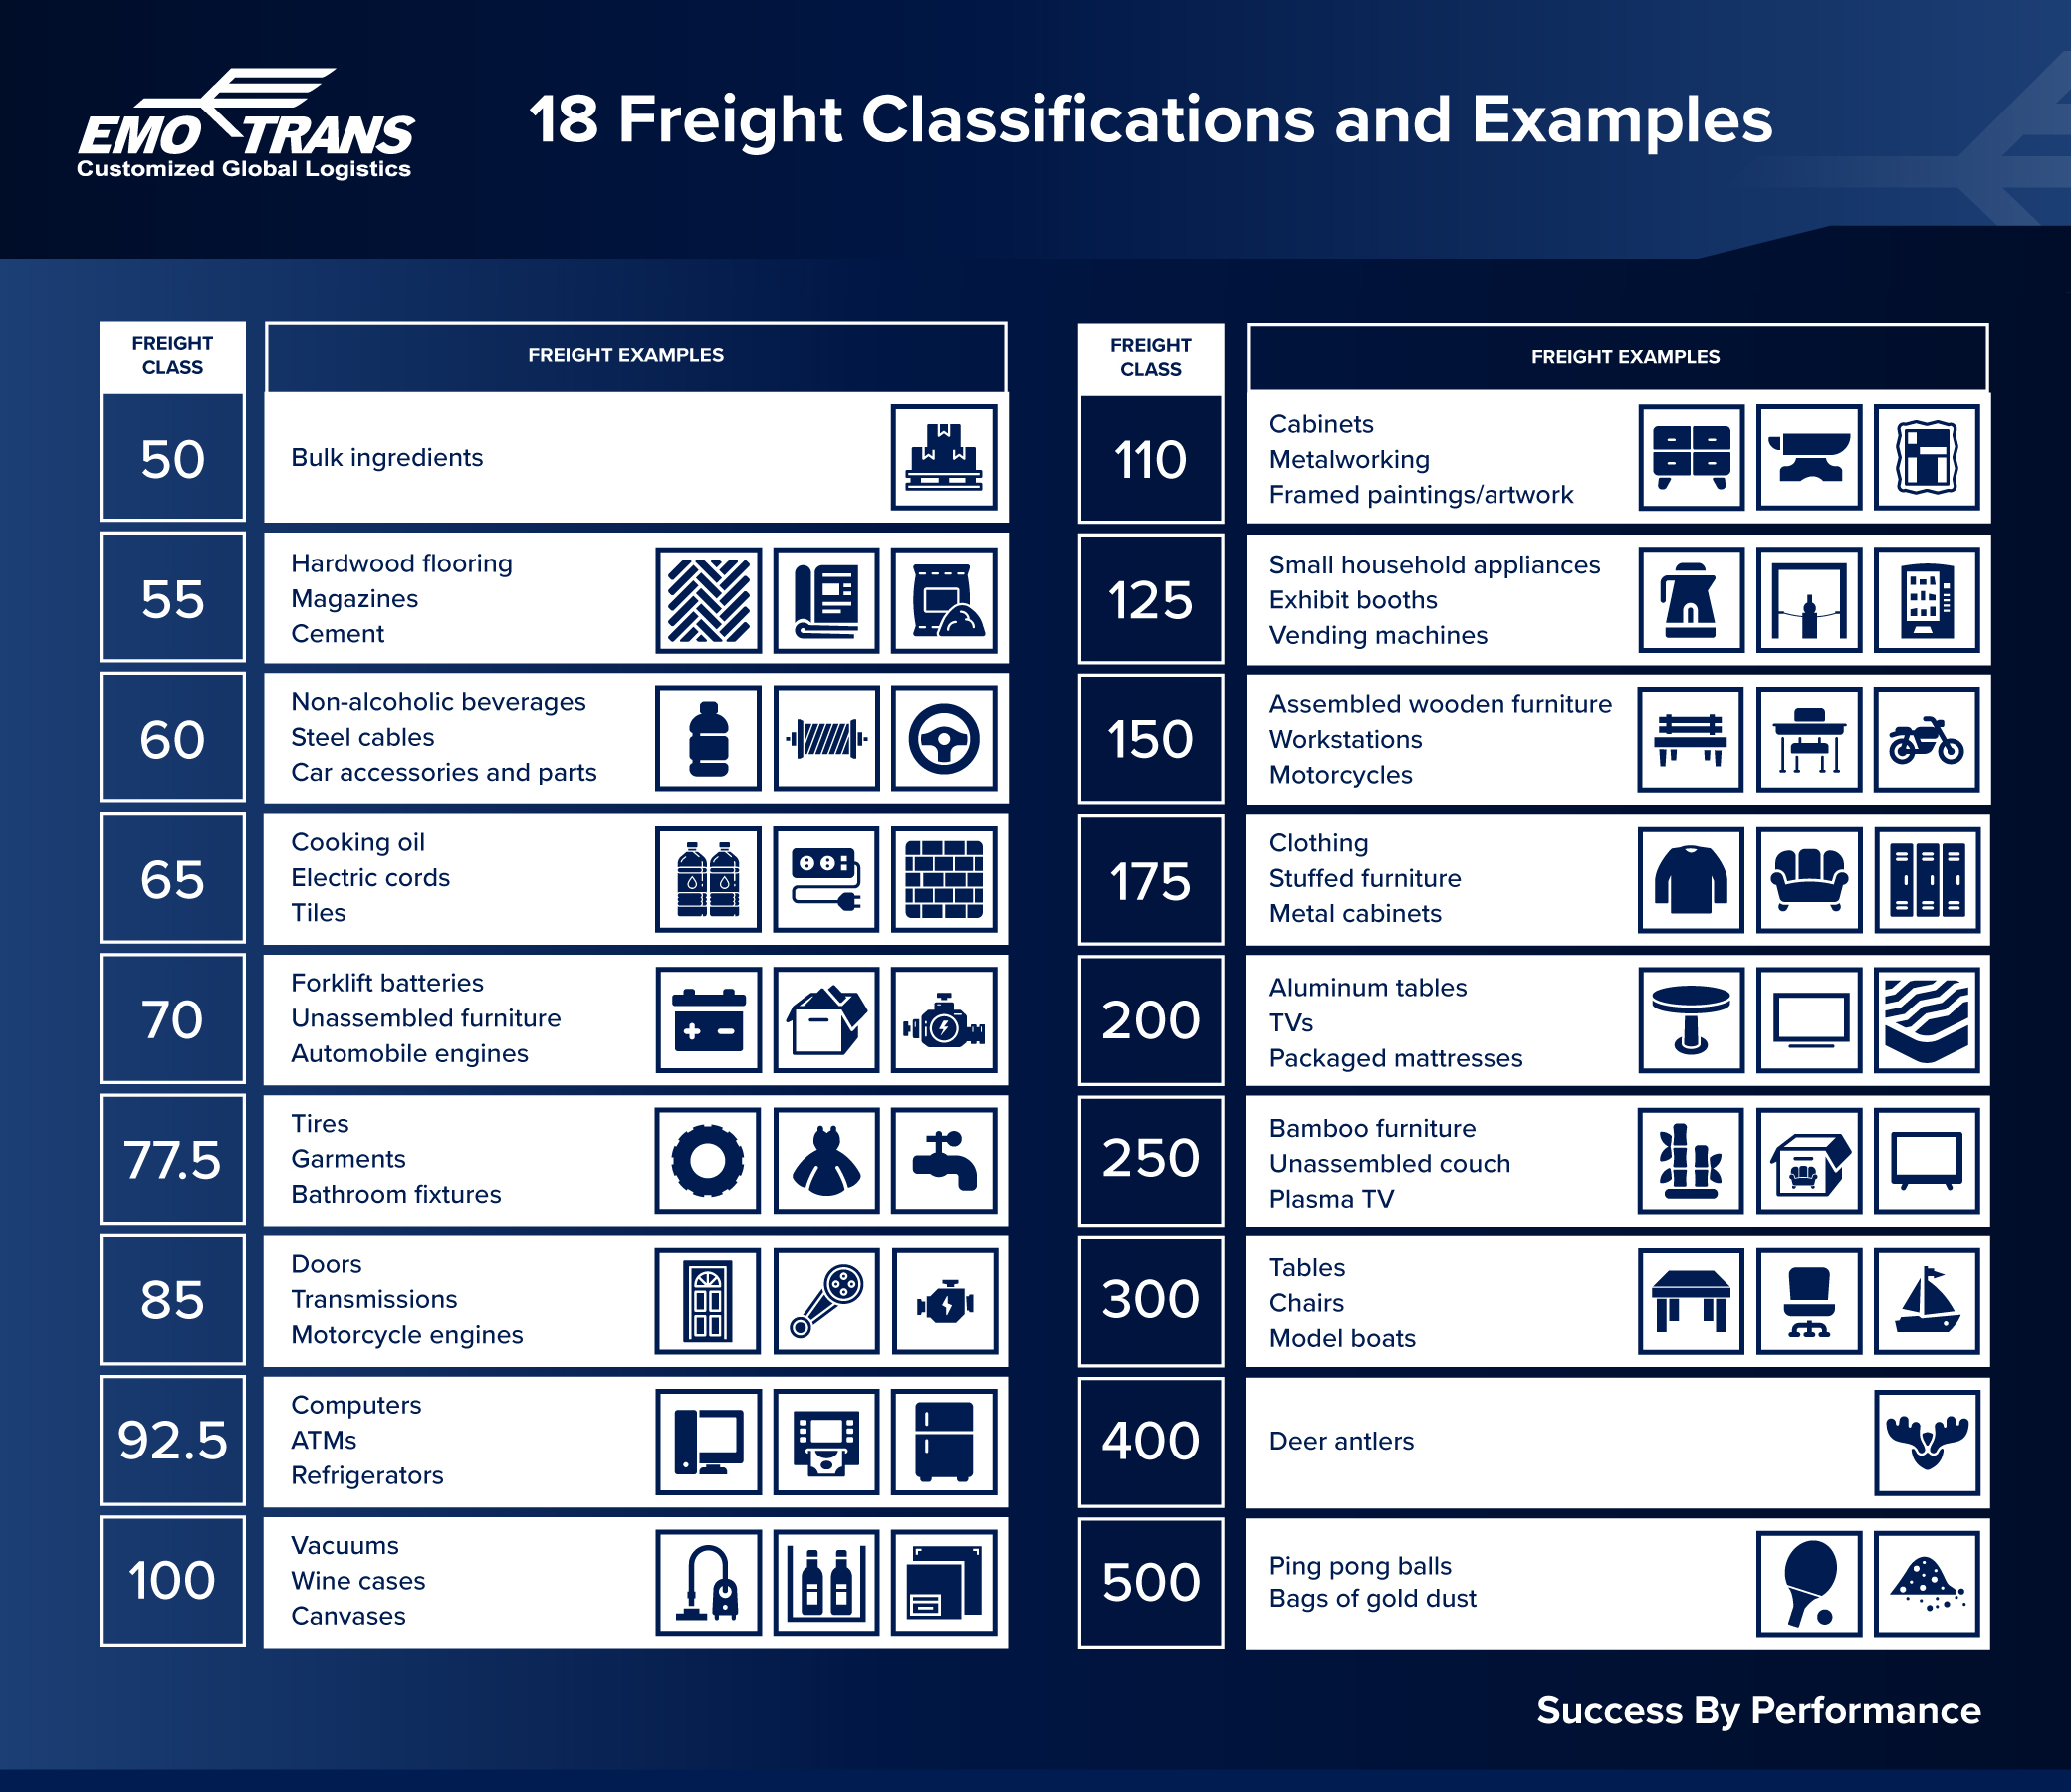 A chart showing the 18 freight classifications with examples and icons